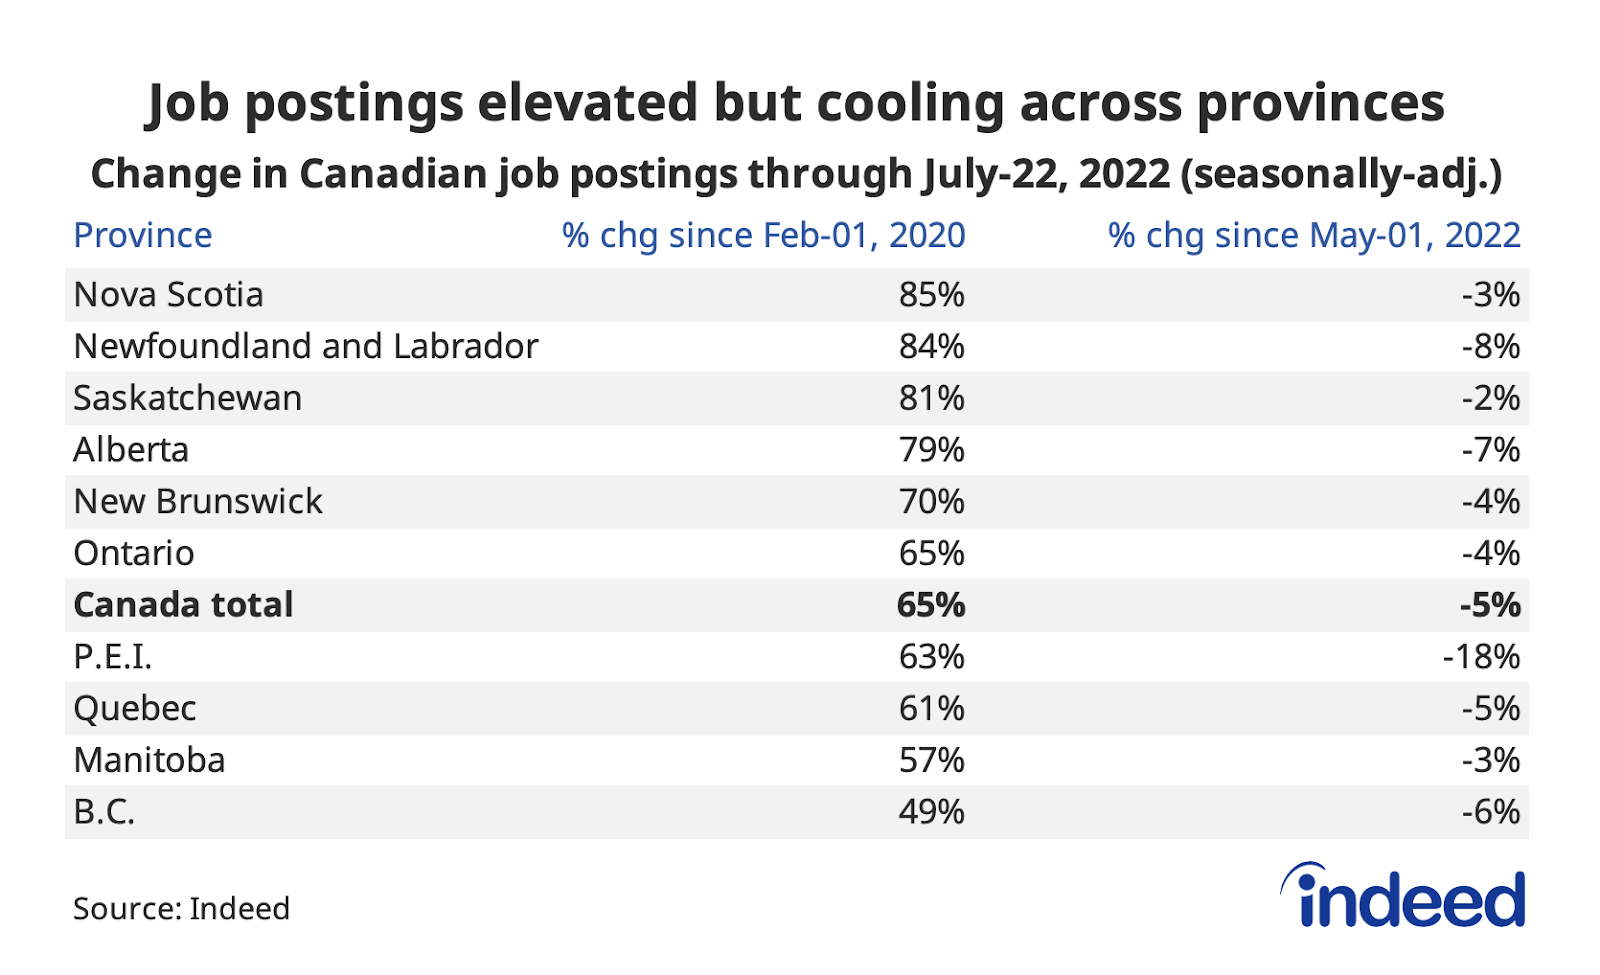 Table titled “Job postings elevated but cooling across provinces.”